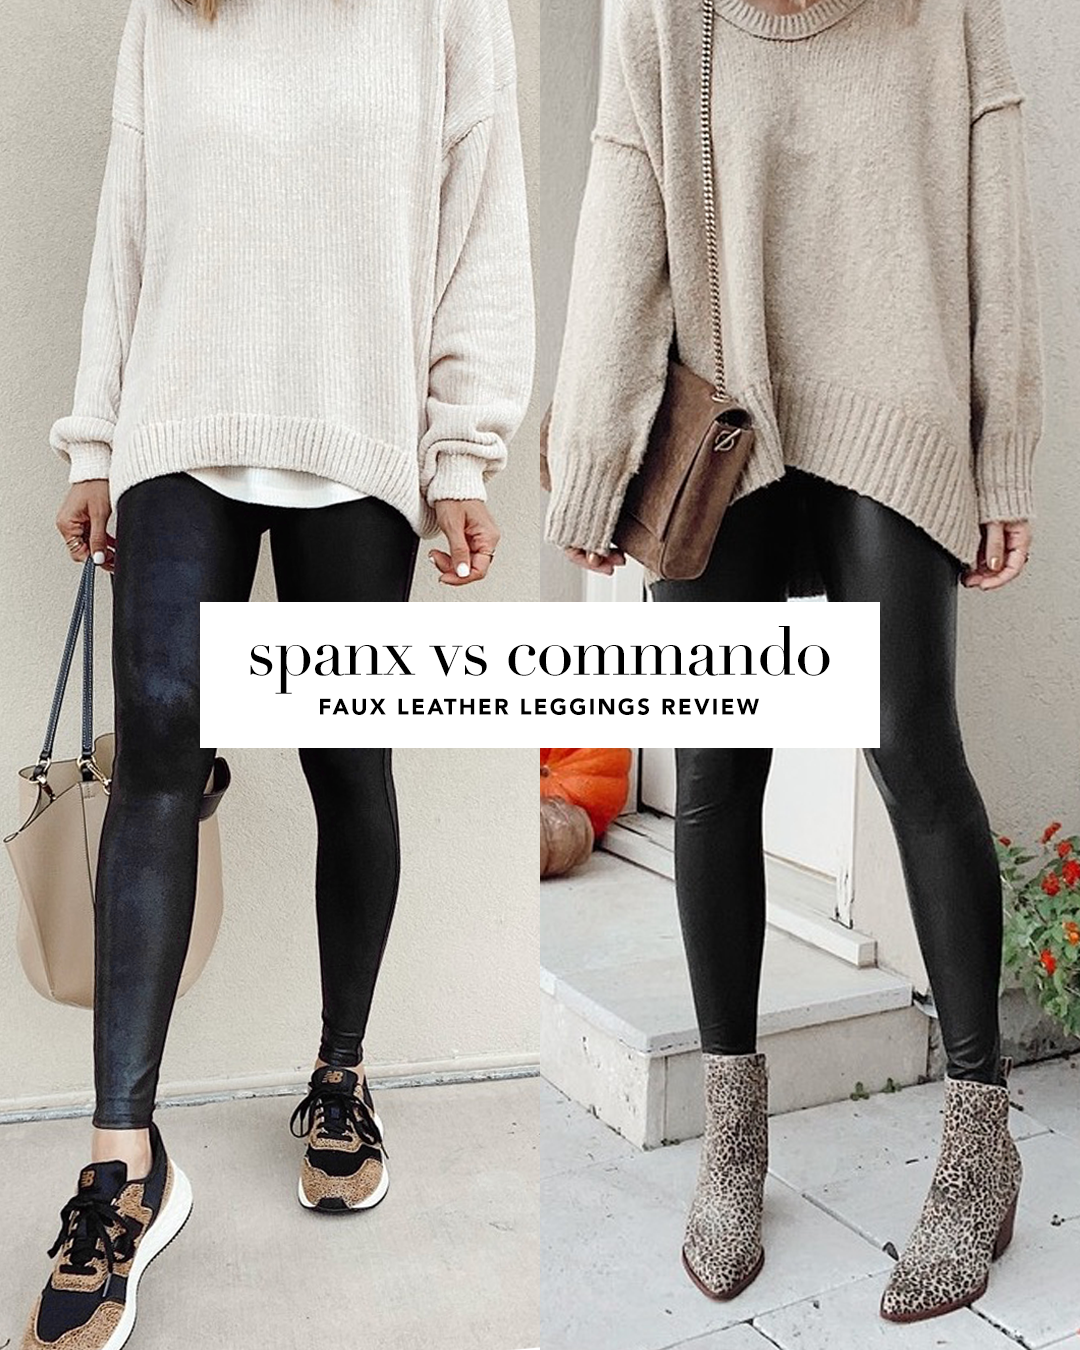 spanx vs commando faux leather leggings review and comparison by jaime shrayber